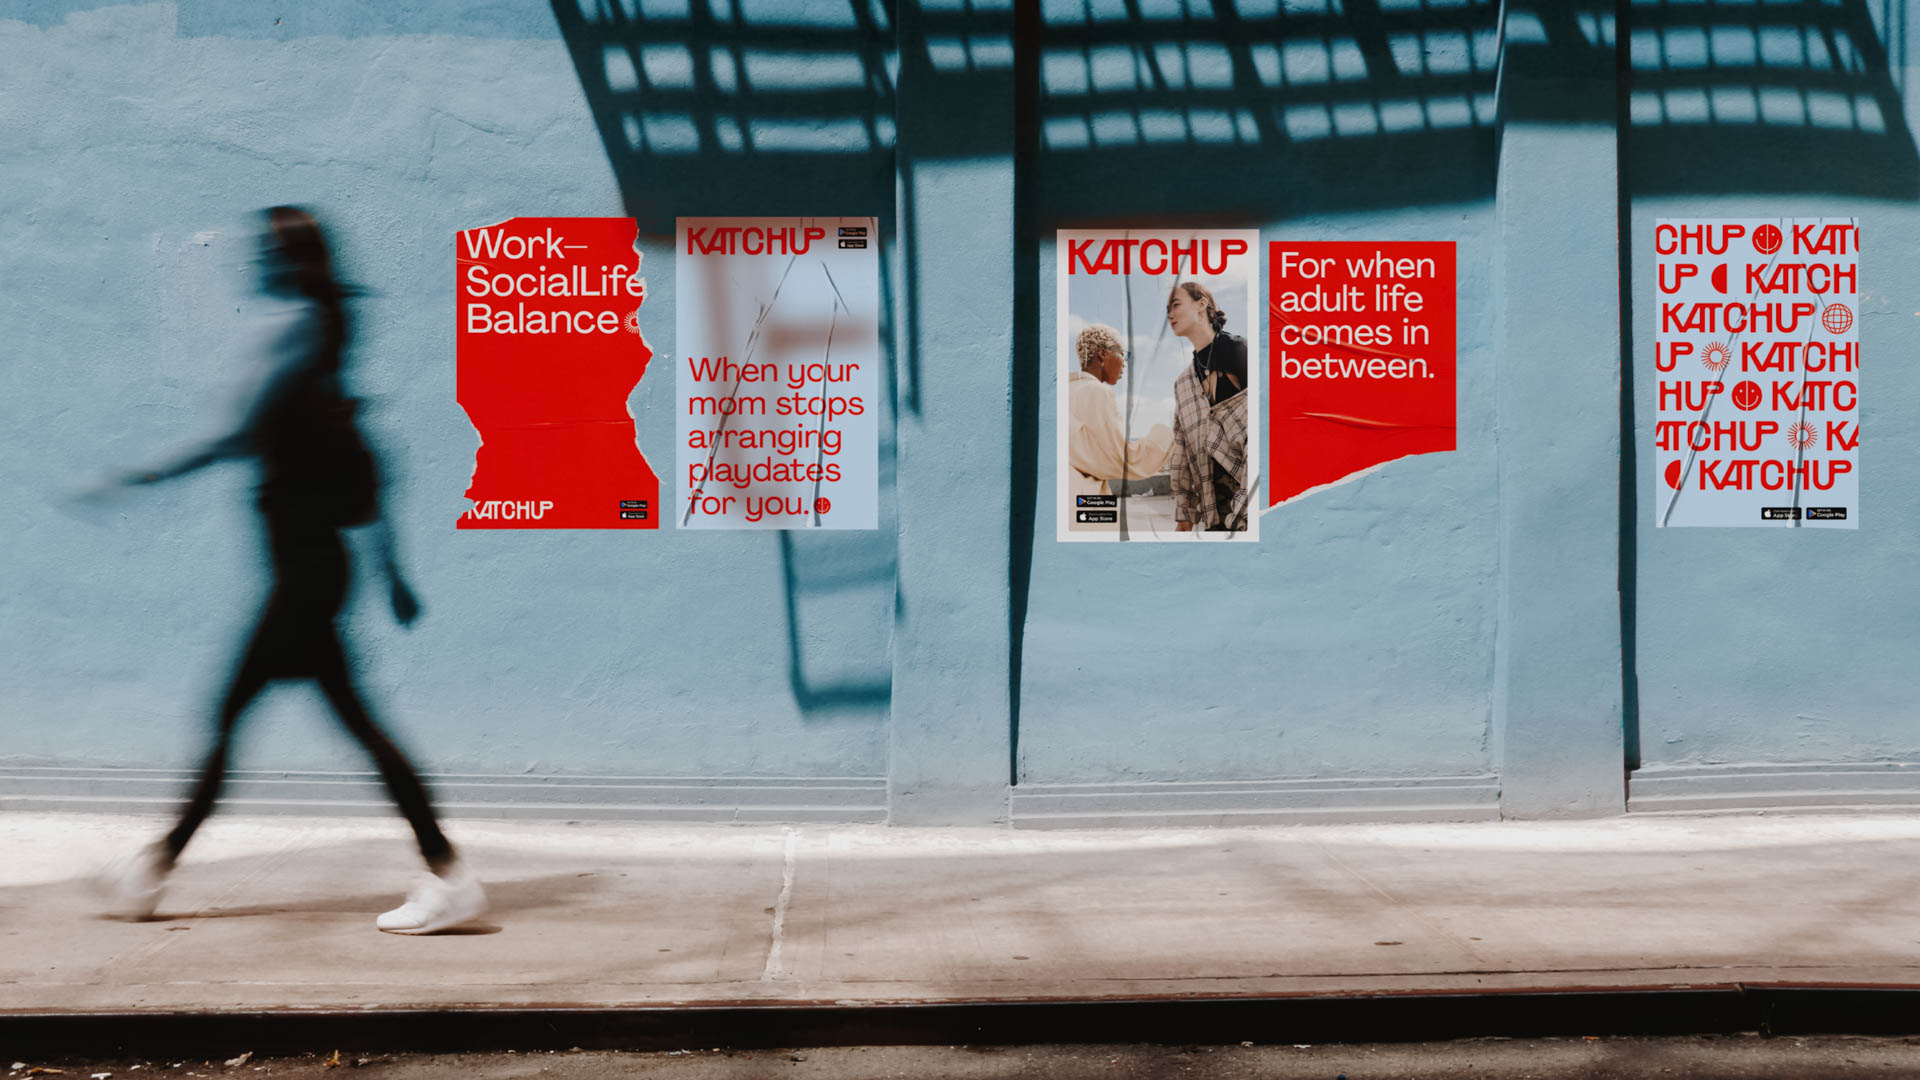 a street scene with posters on the wall for the Katchup app